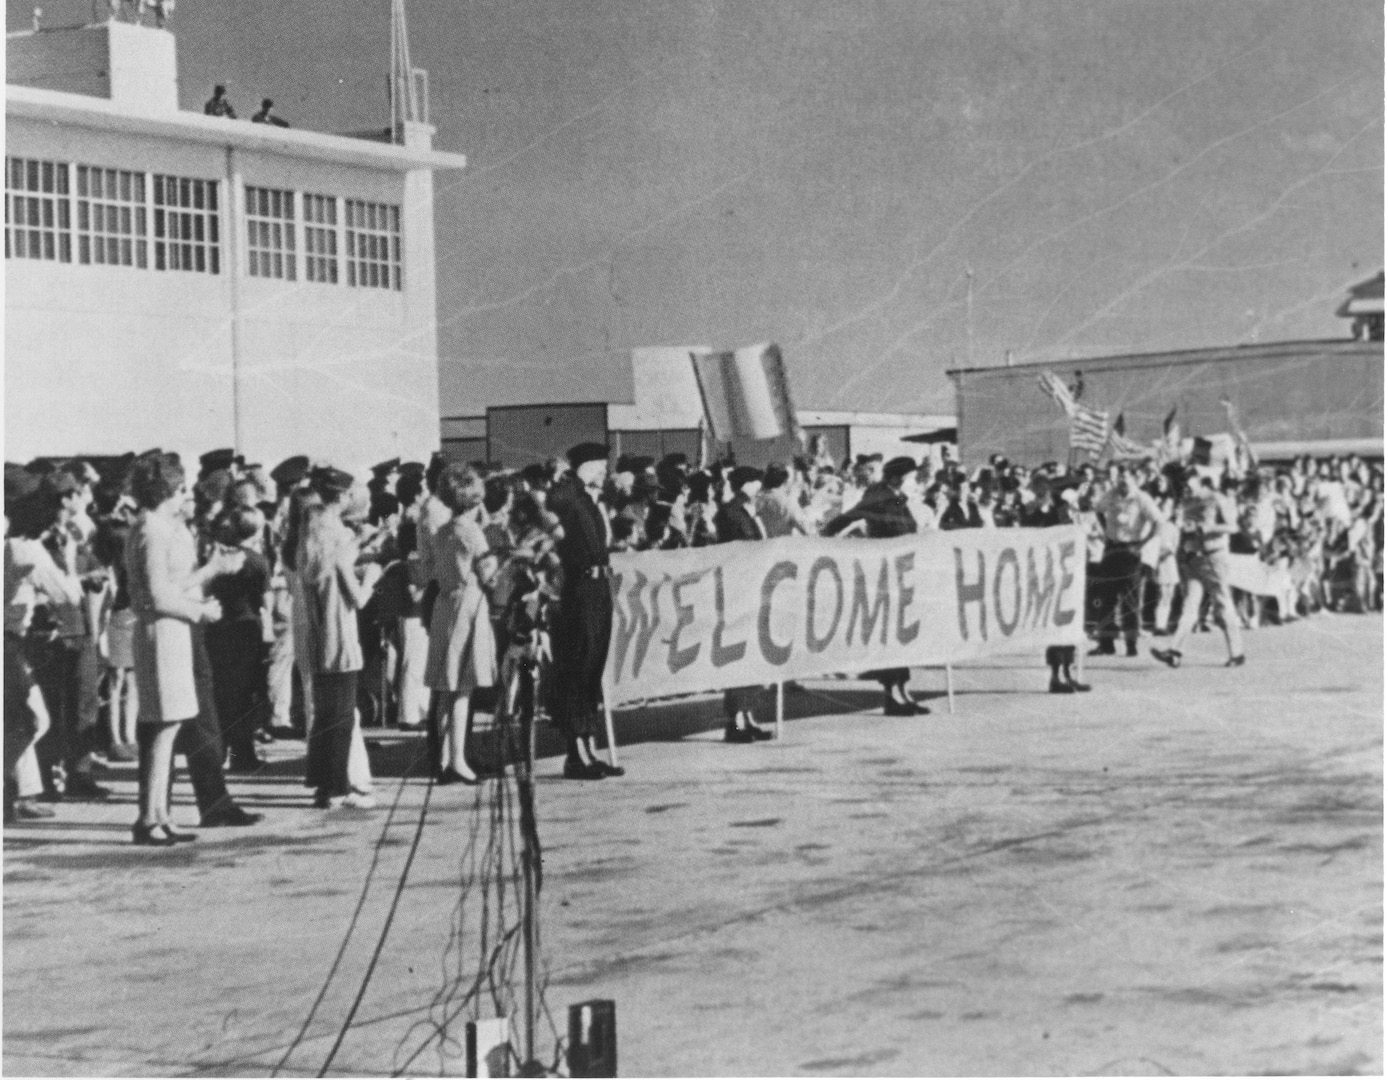 A cheering crowd greets former Vietnam prisoners of war returning home at Kelly Field, Texas, as part of Operation Homecoming, February 1973. (U.S. Air Force photo) (caption cited from http://www.AF.mil)
